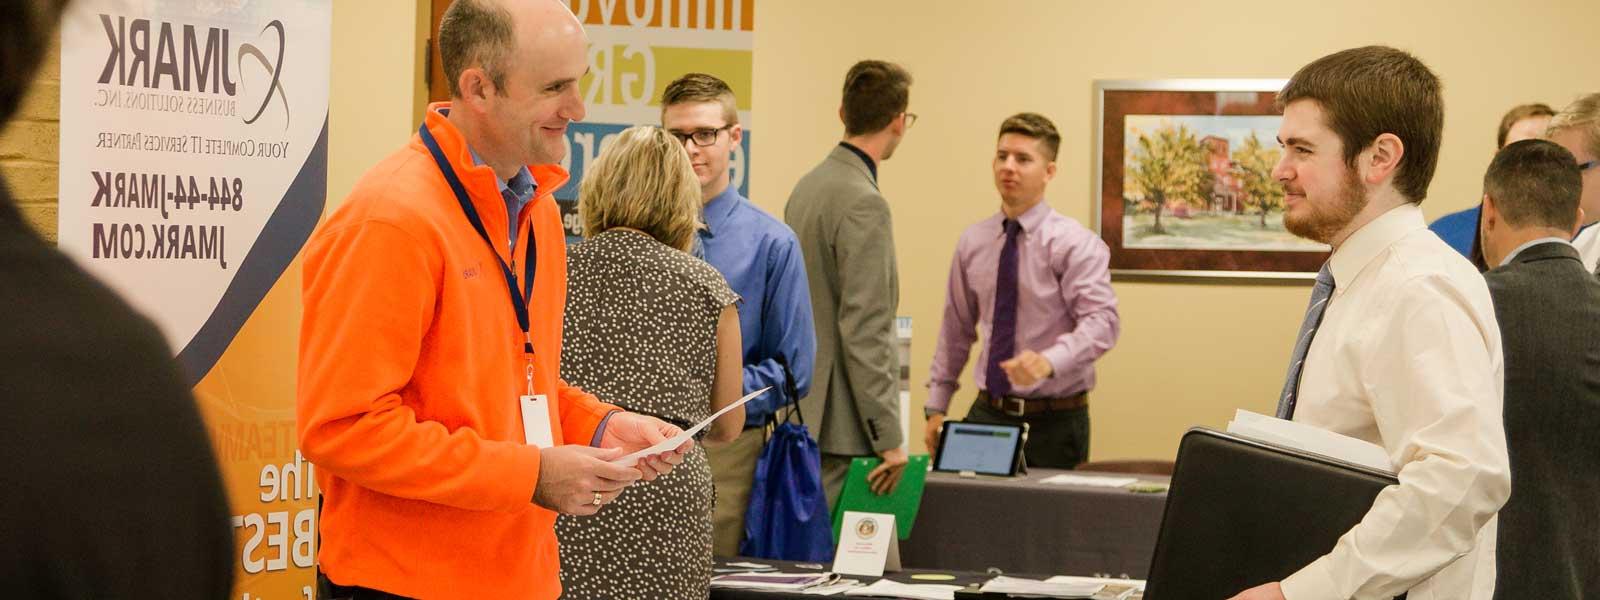 students interact with professionals at career fair